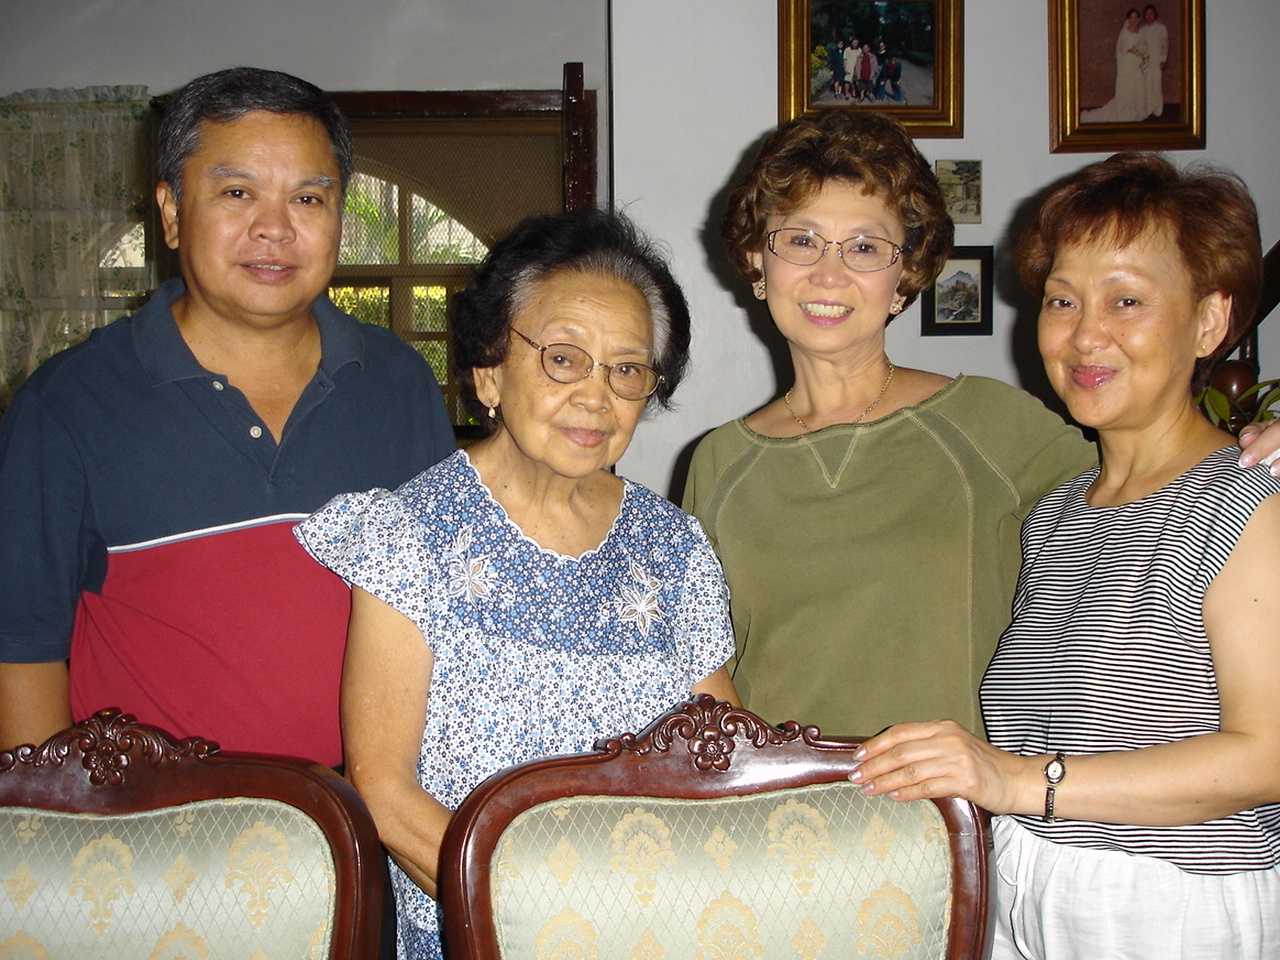 a man in glasses poses for a pograph with two older women and a young man